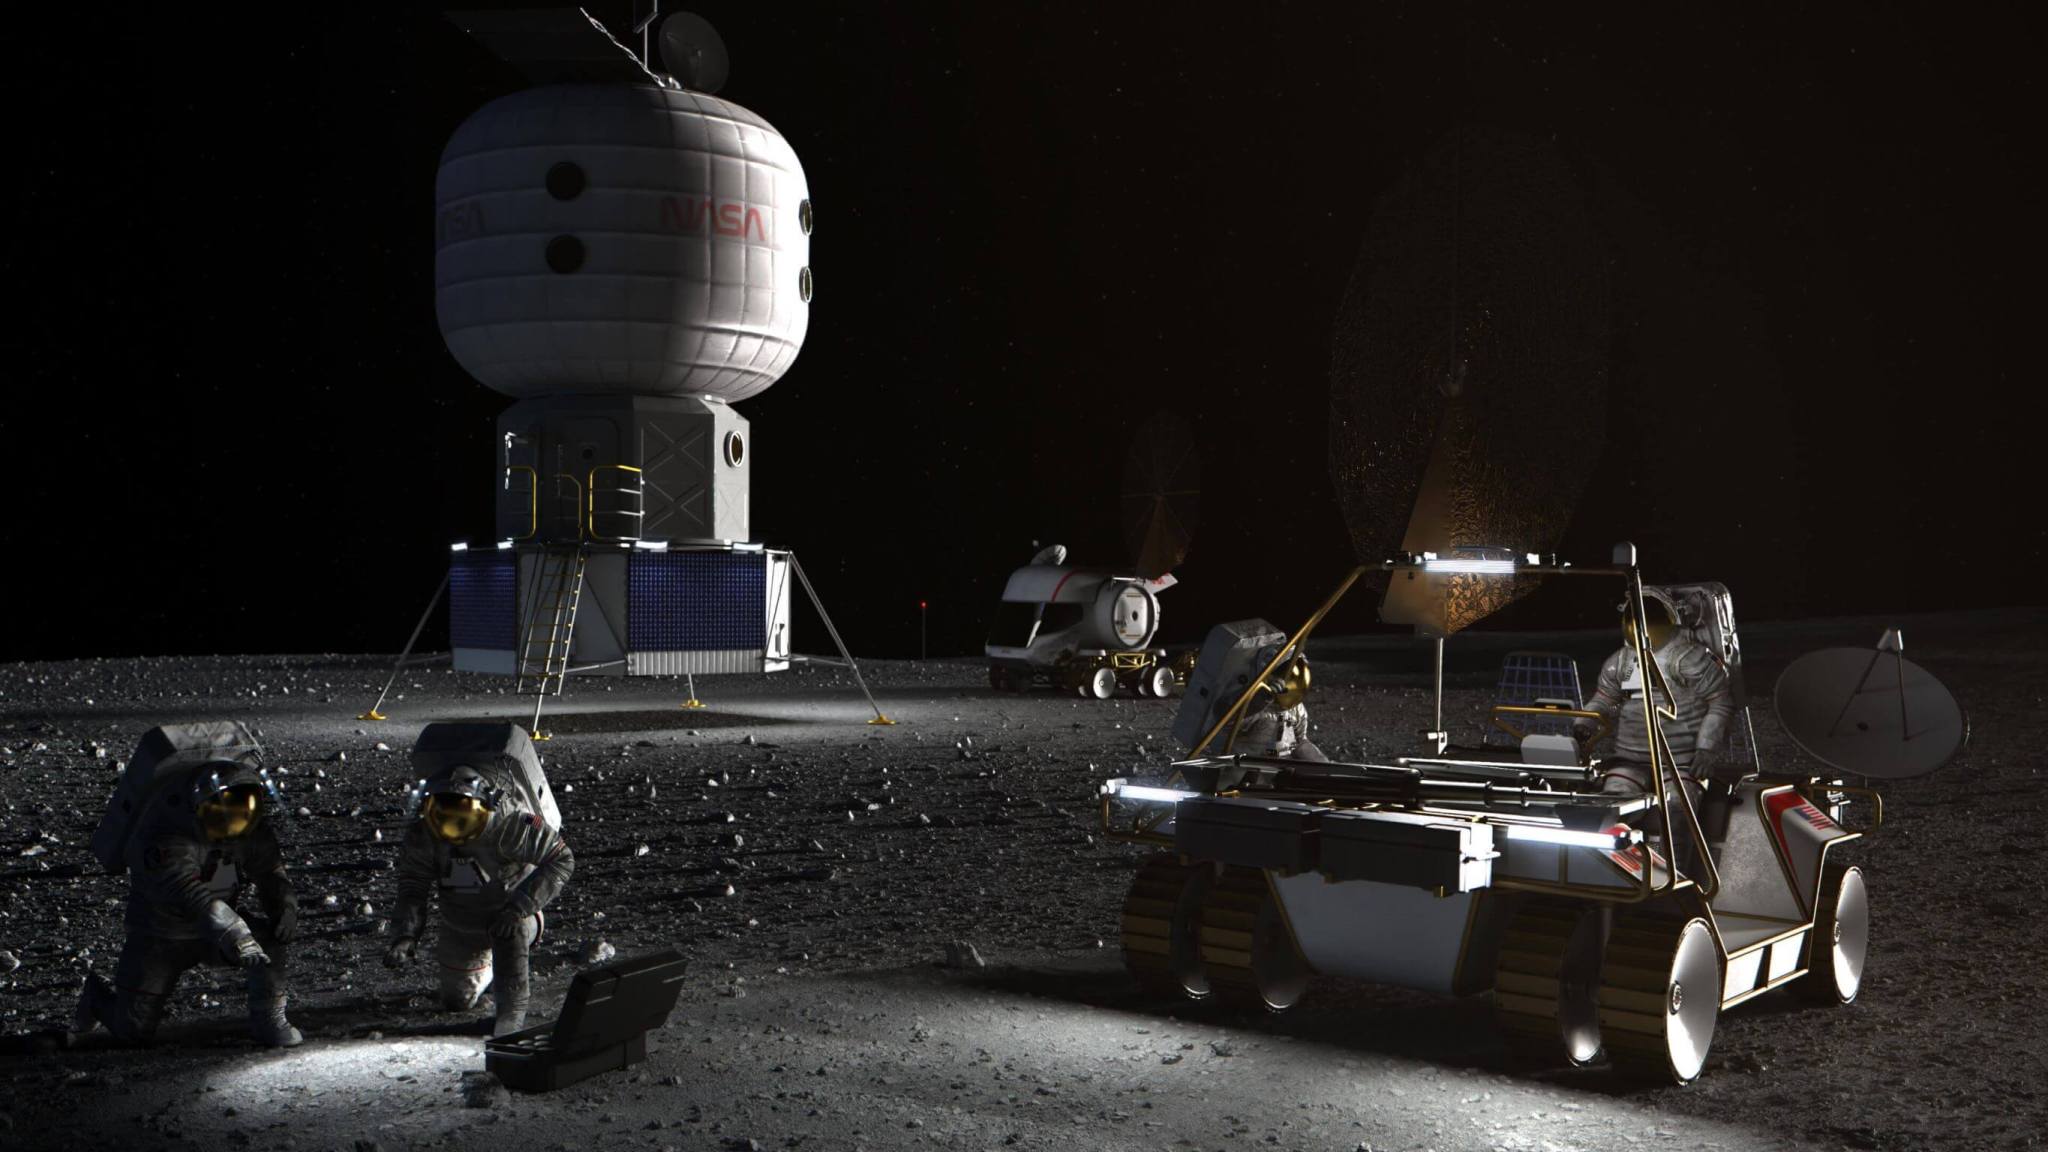 Illustration of four Astronauts on a Moon with two vehicles.